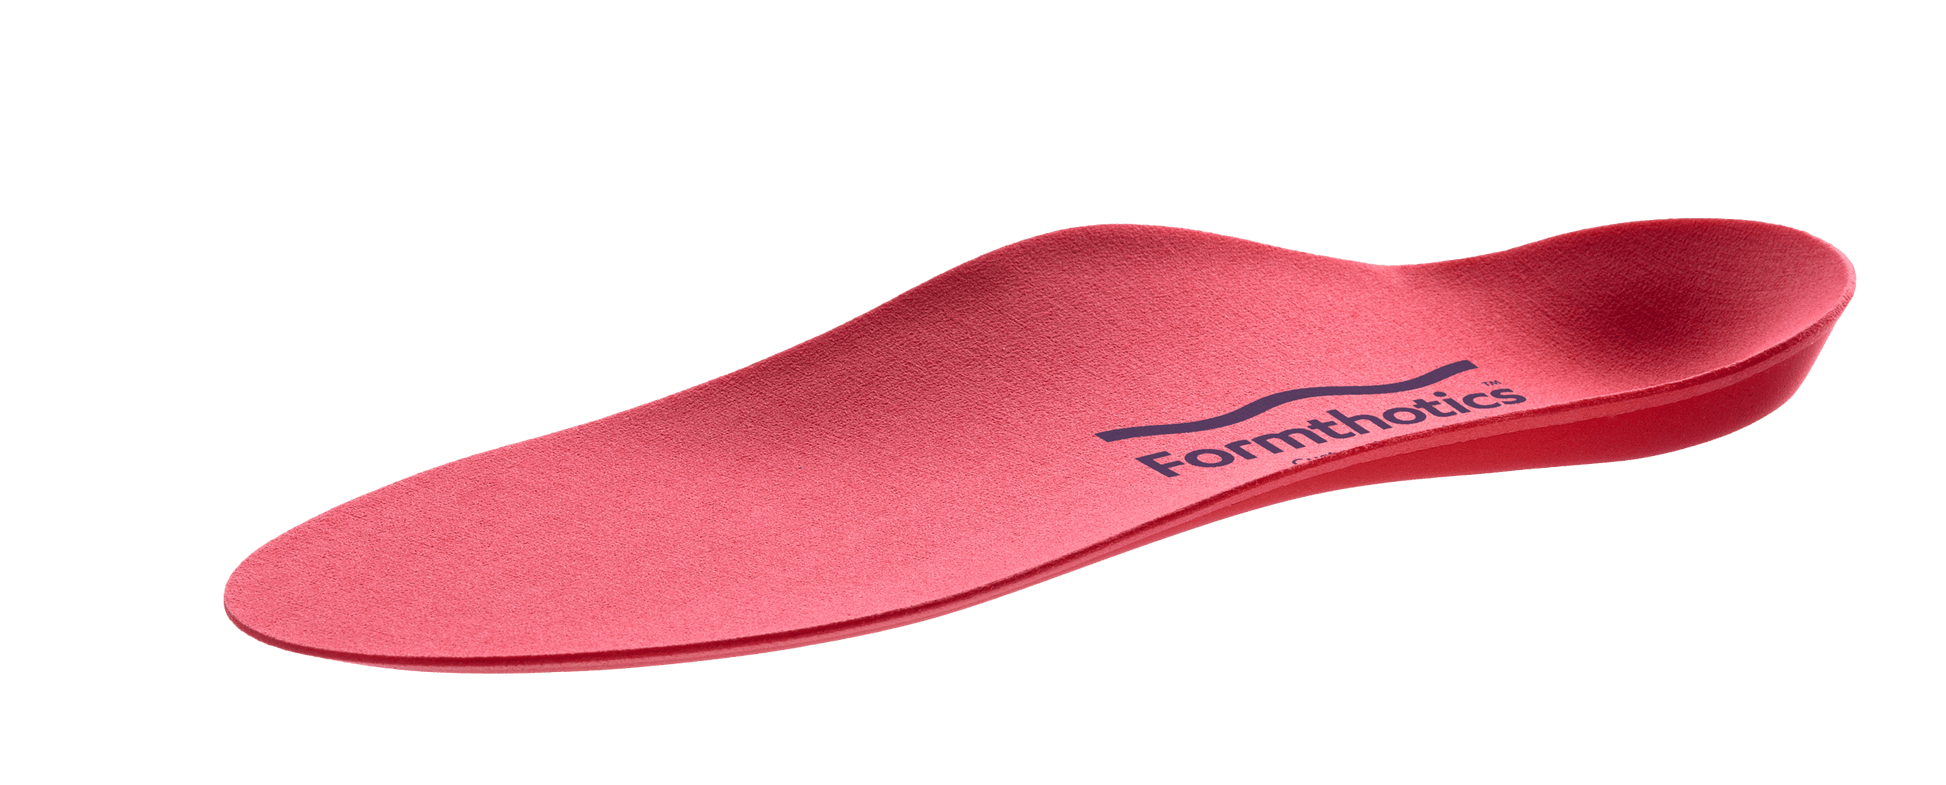 Formthotics 203 Full Length, Dual Density Hard Orthoses Red/Red - Anjelstore 